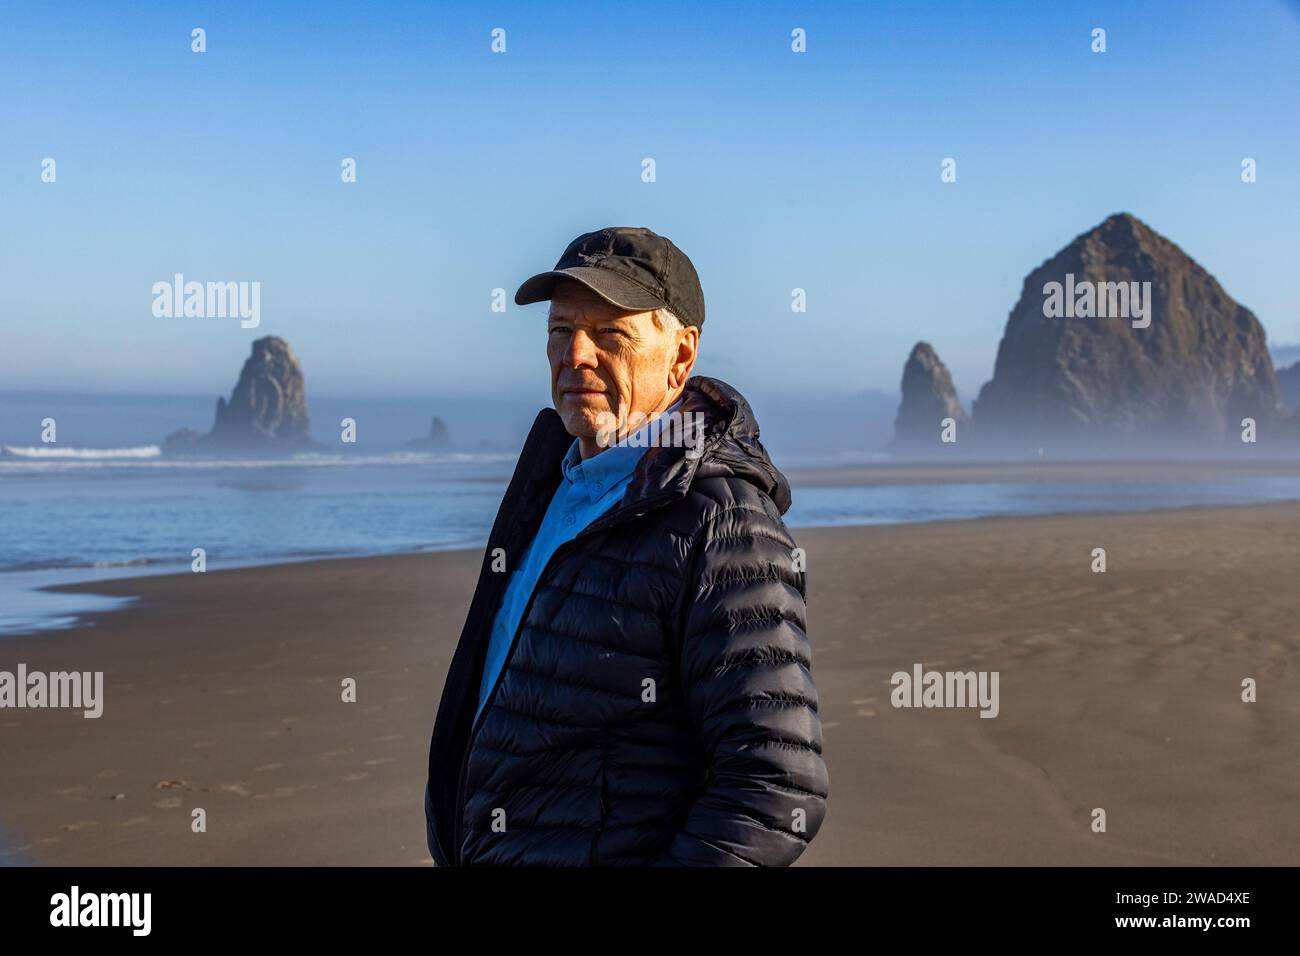 USA, Oregon, Portrait of man standing near Haystack Rock at Cannon Beach in morning mist Stock Photo